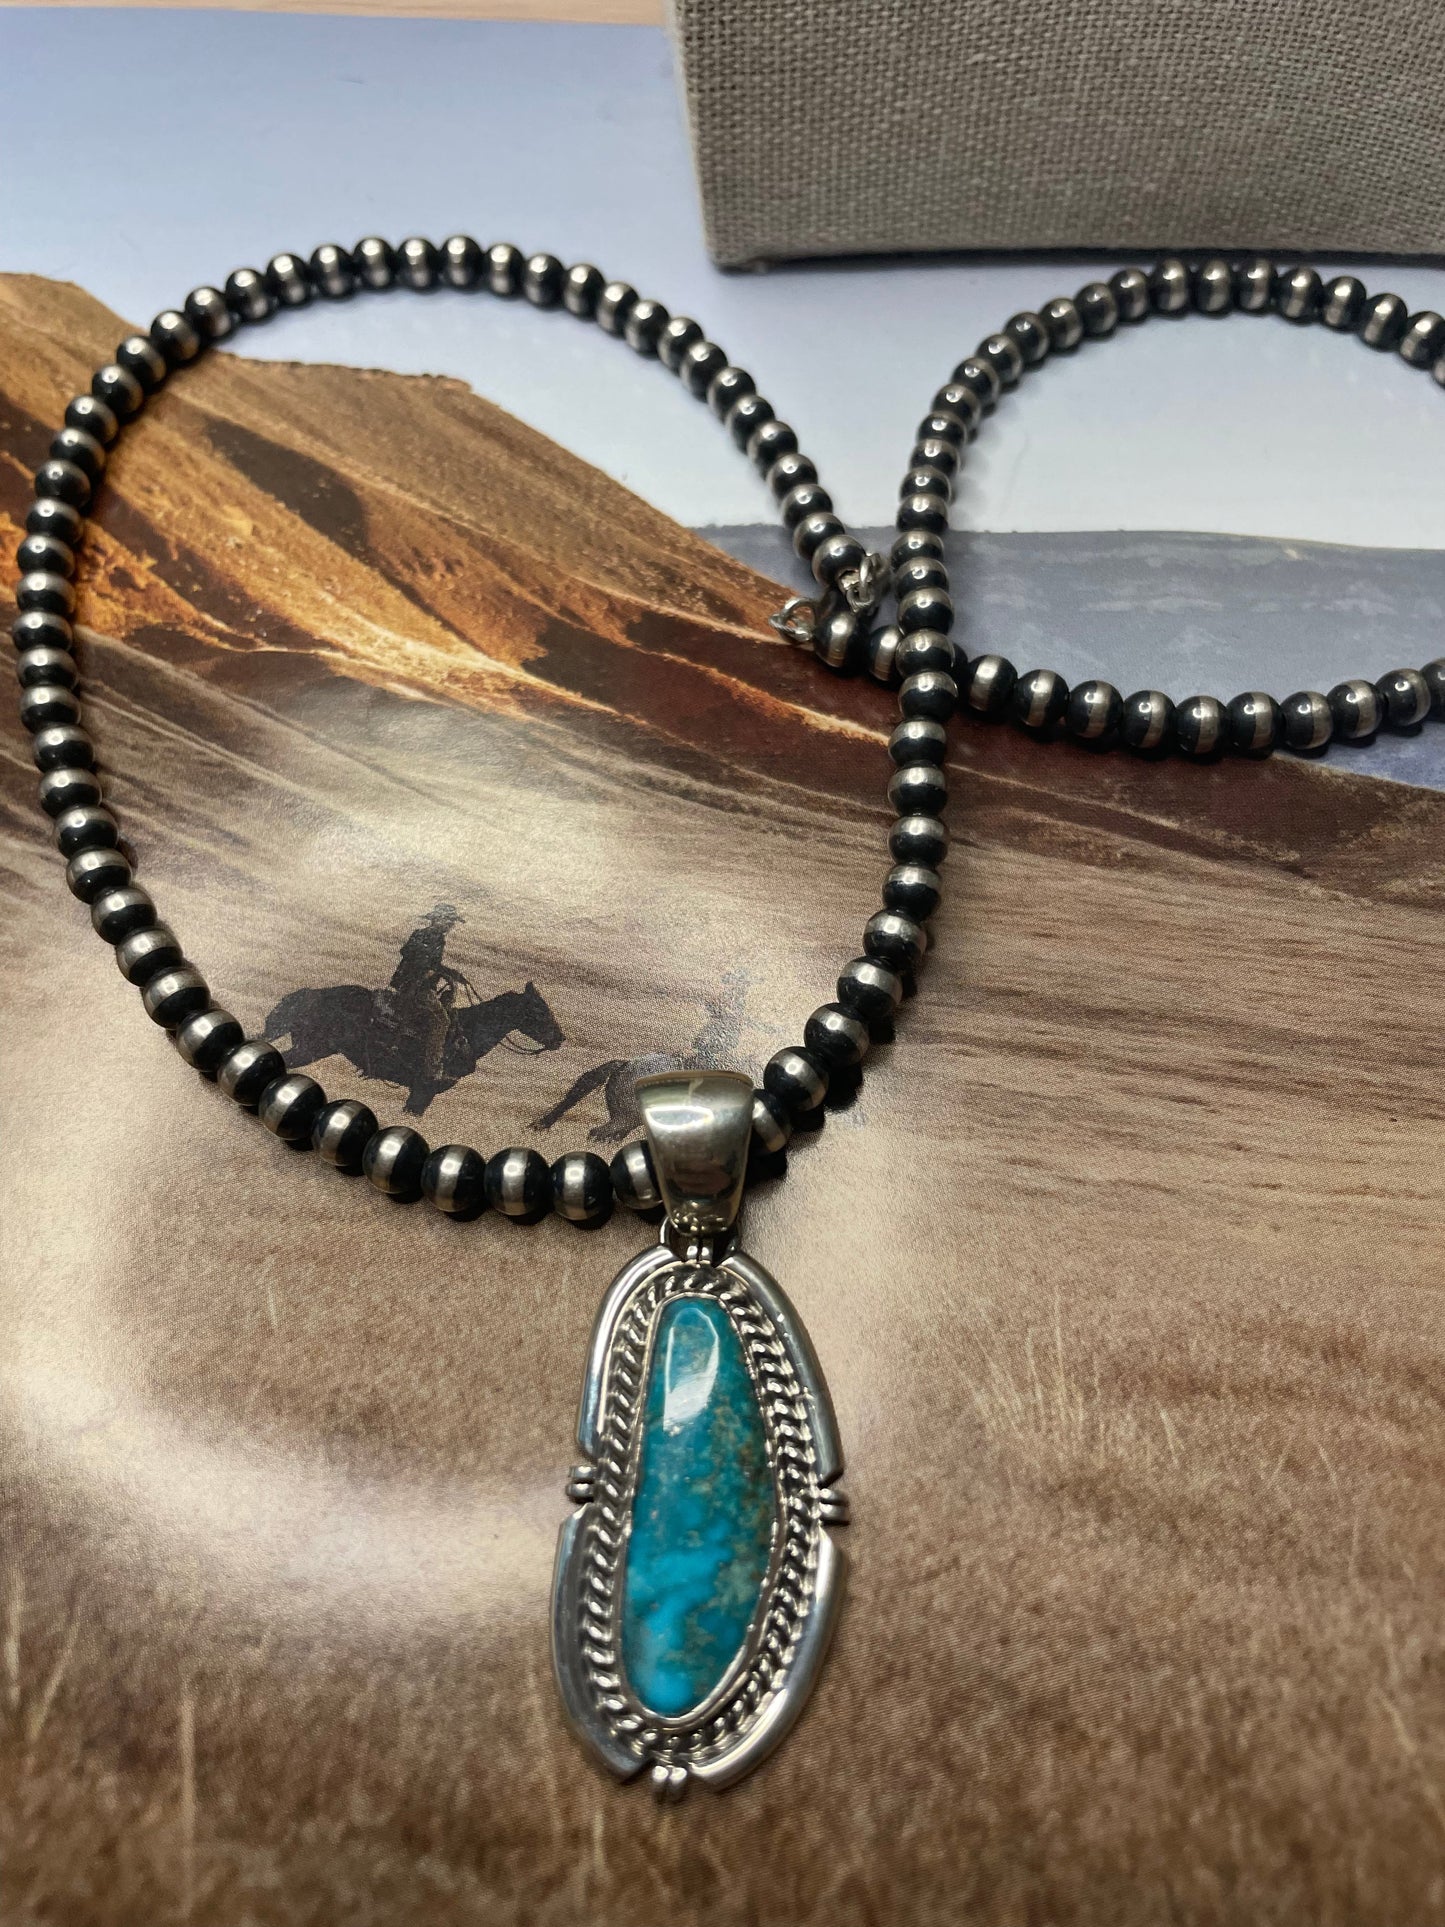 Navajo Sterling Silver & Turquoise Pendant Signed